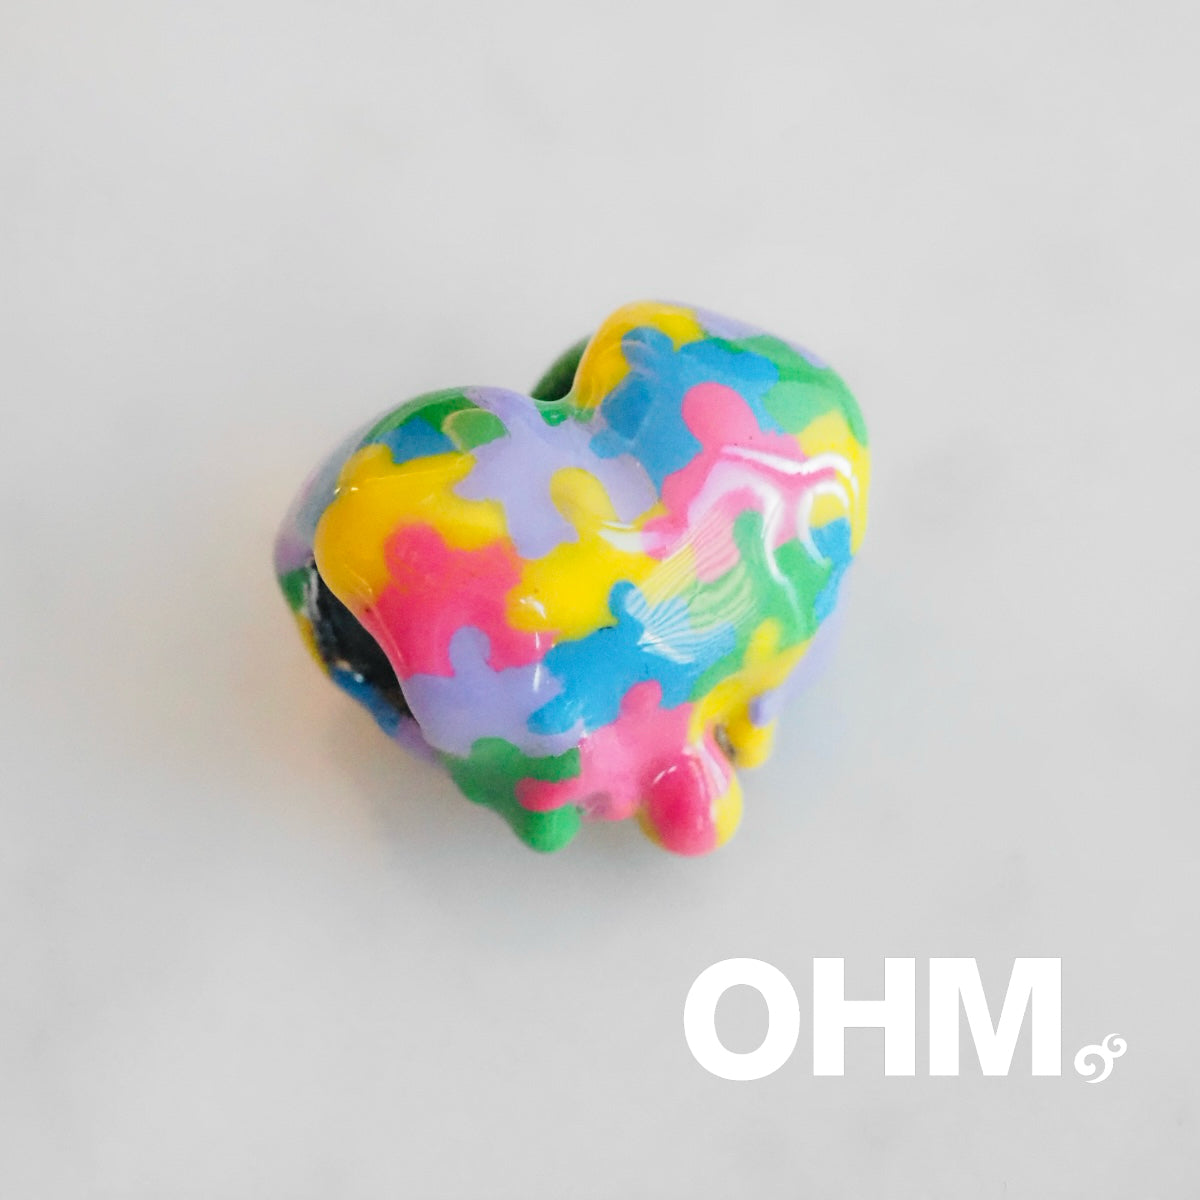 OHMnique - Puzzle Heart  - Happy New Year LE  Collection - Last piece